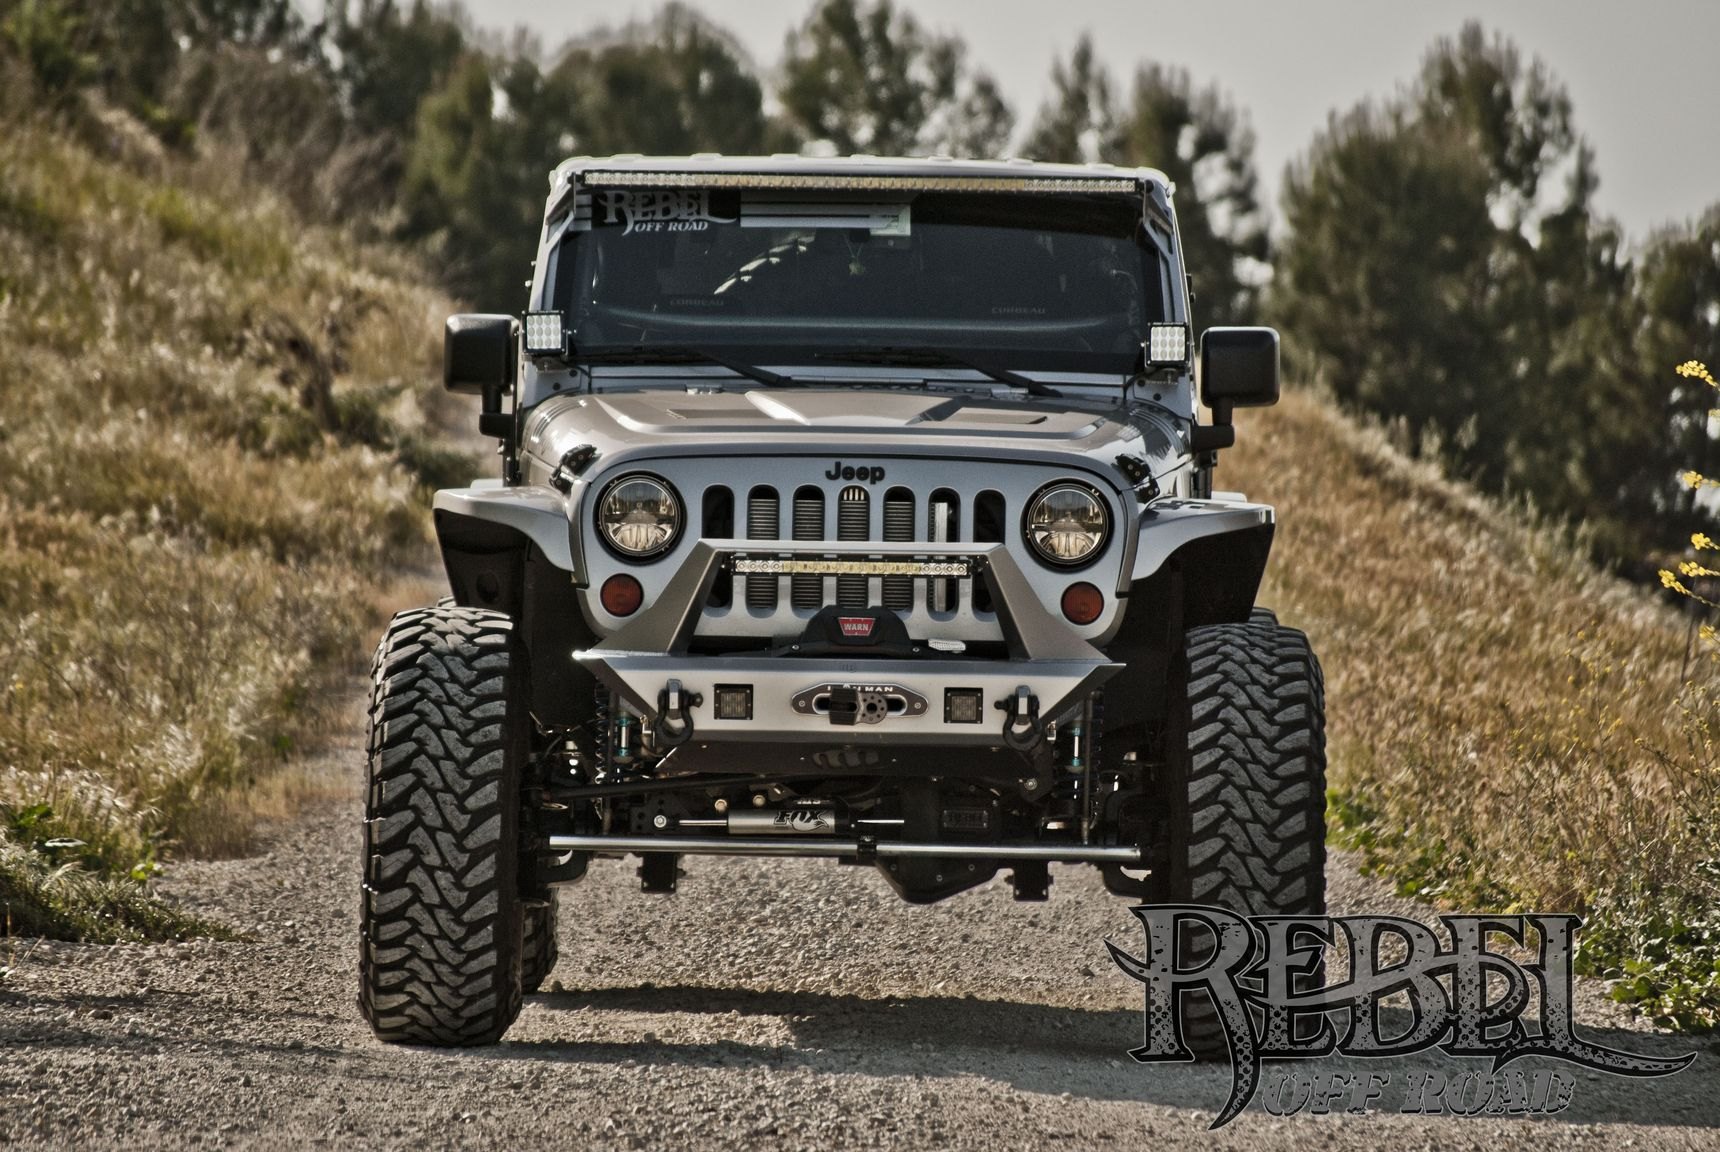 Gray Lifted Jeep Wrangler with Custom Headlights - Photo by Rebel Off-Road